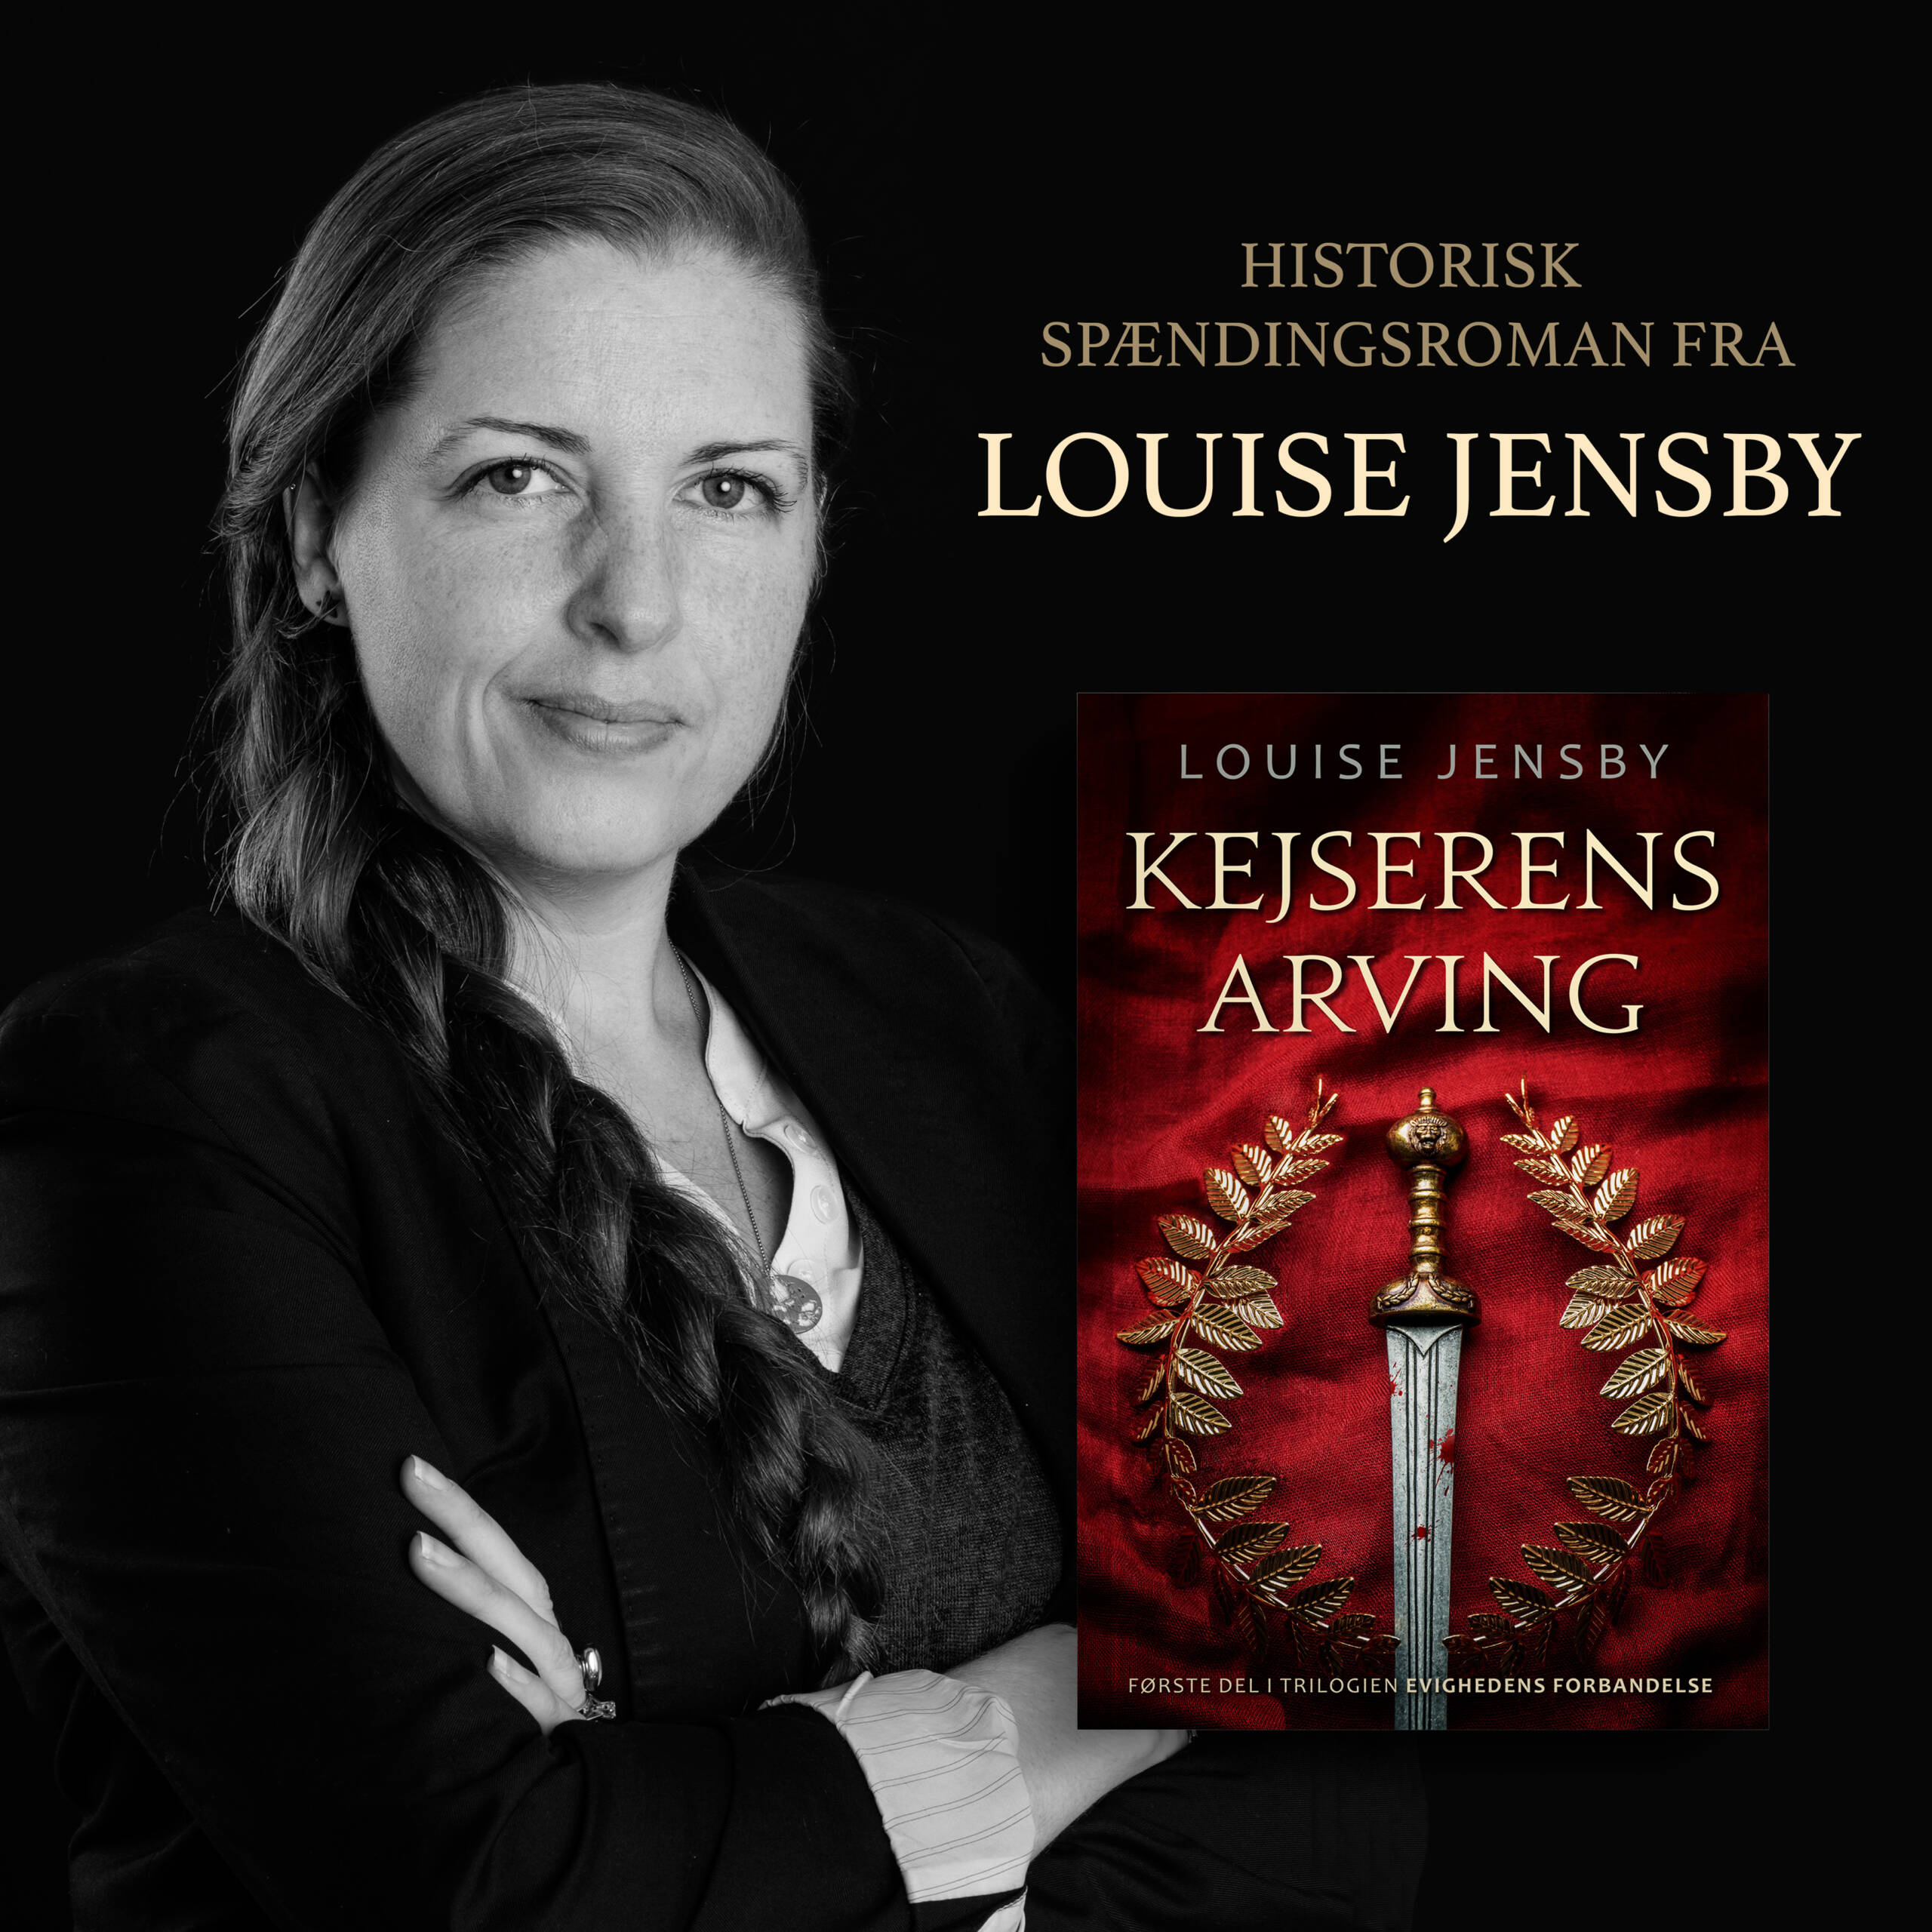 Louise Jensby